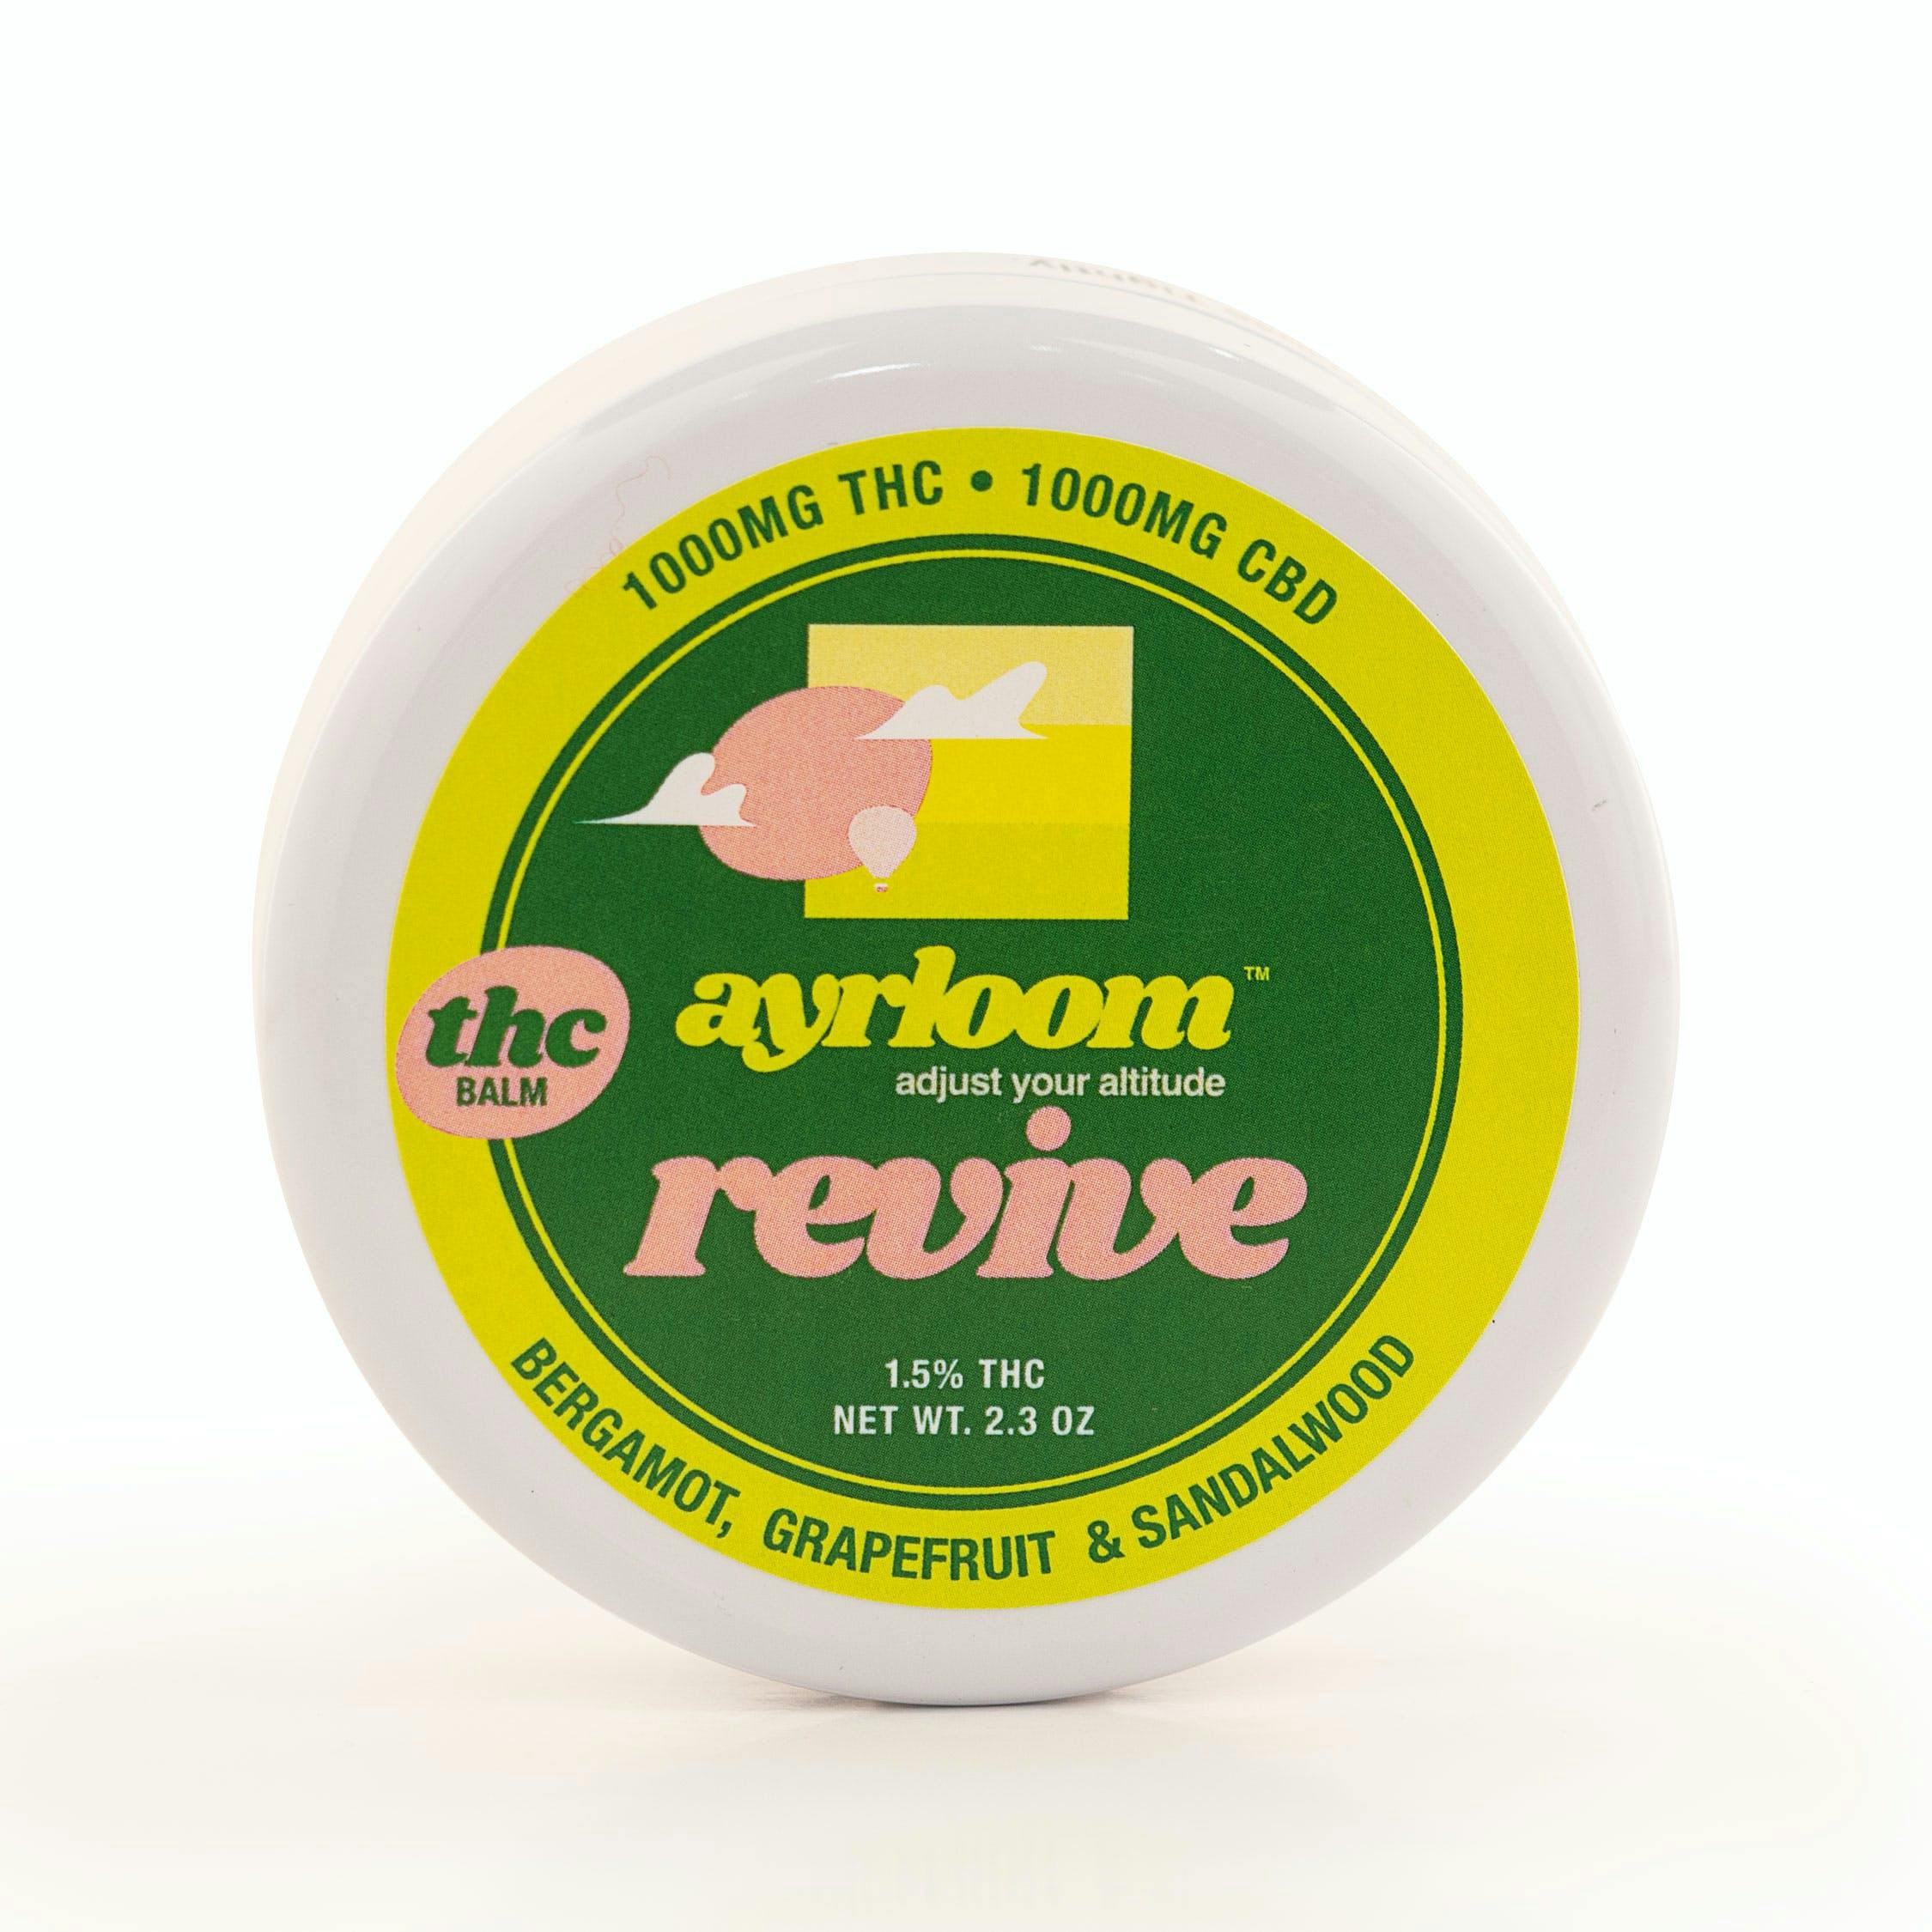 Revive • Balm - ayrloom | Treehouse Cannabis - Weed delivery for New York